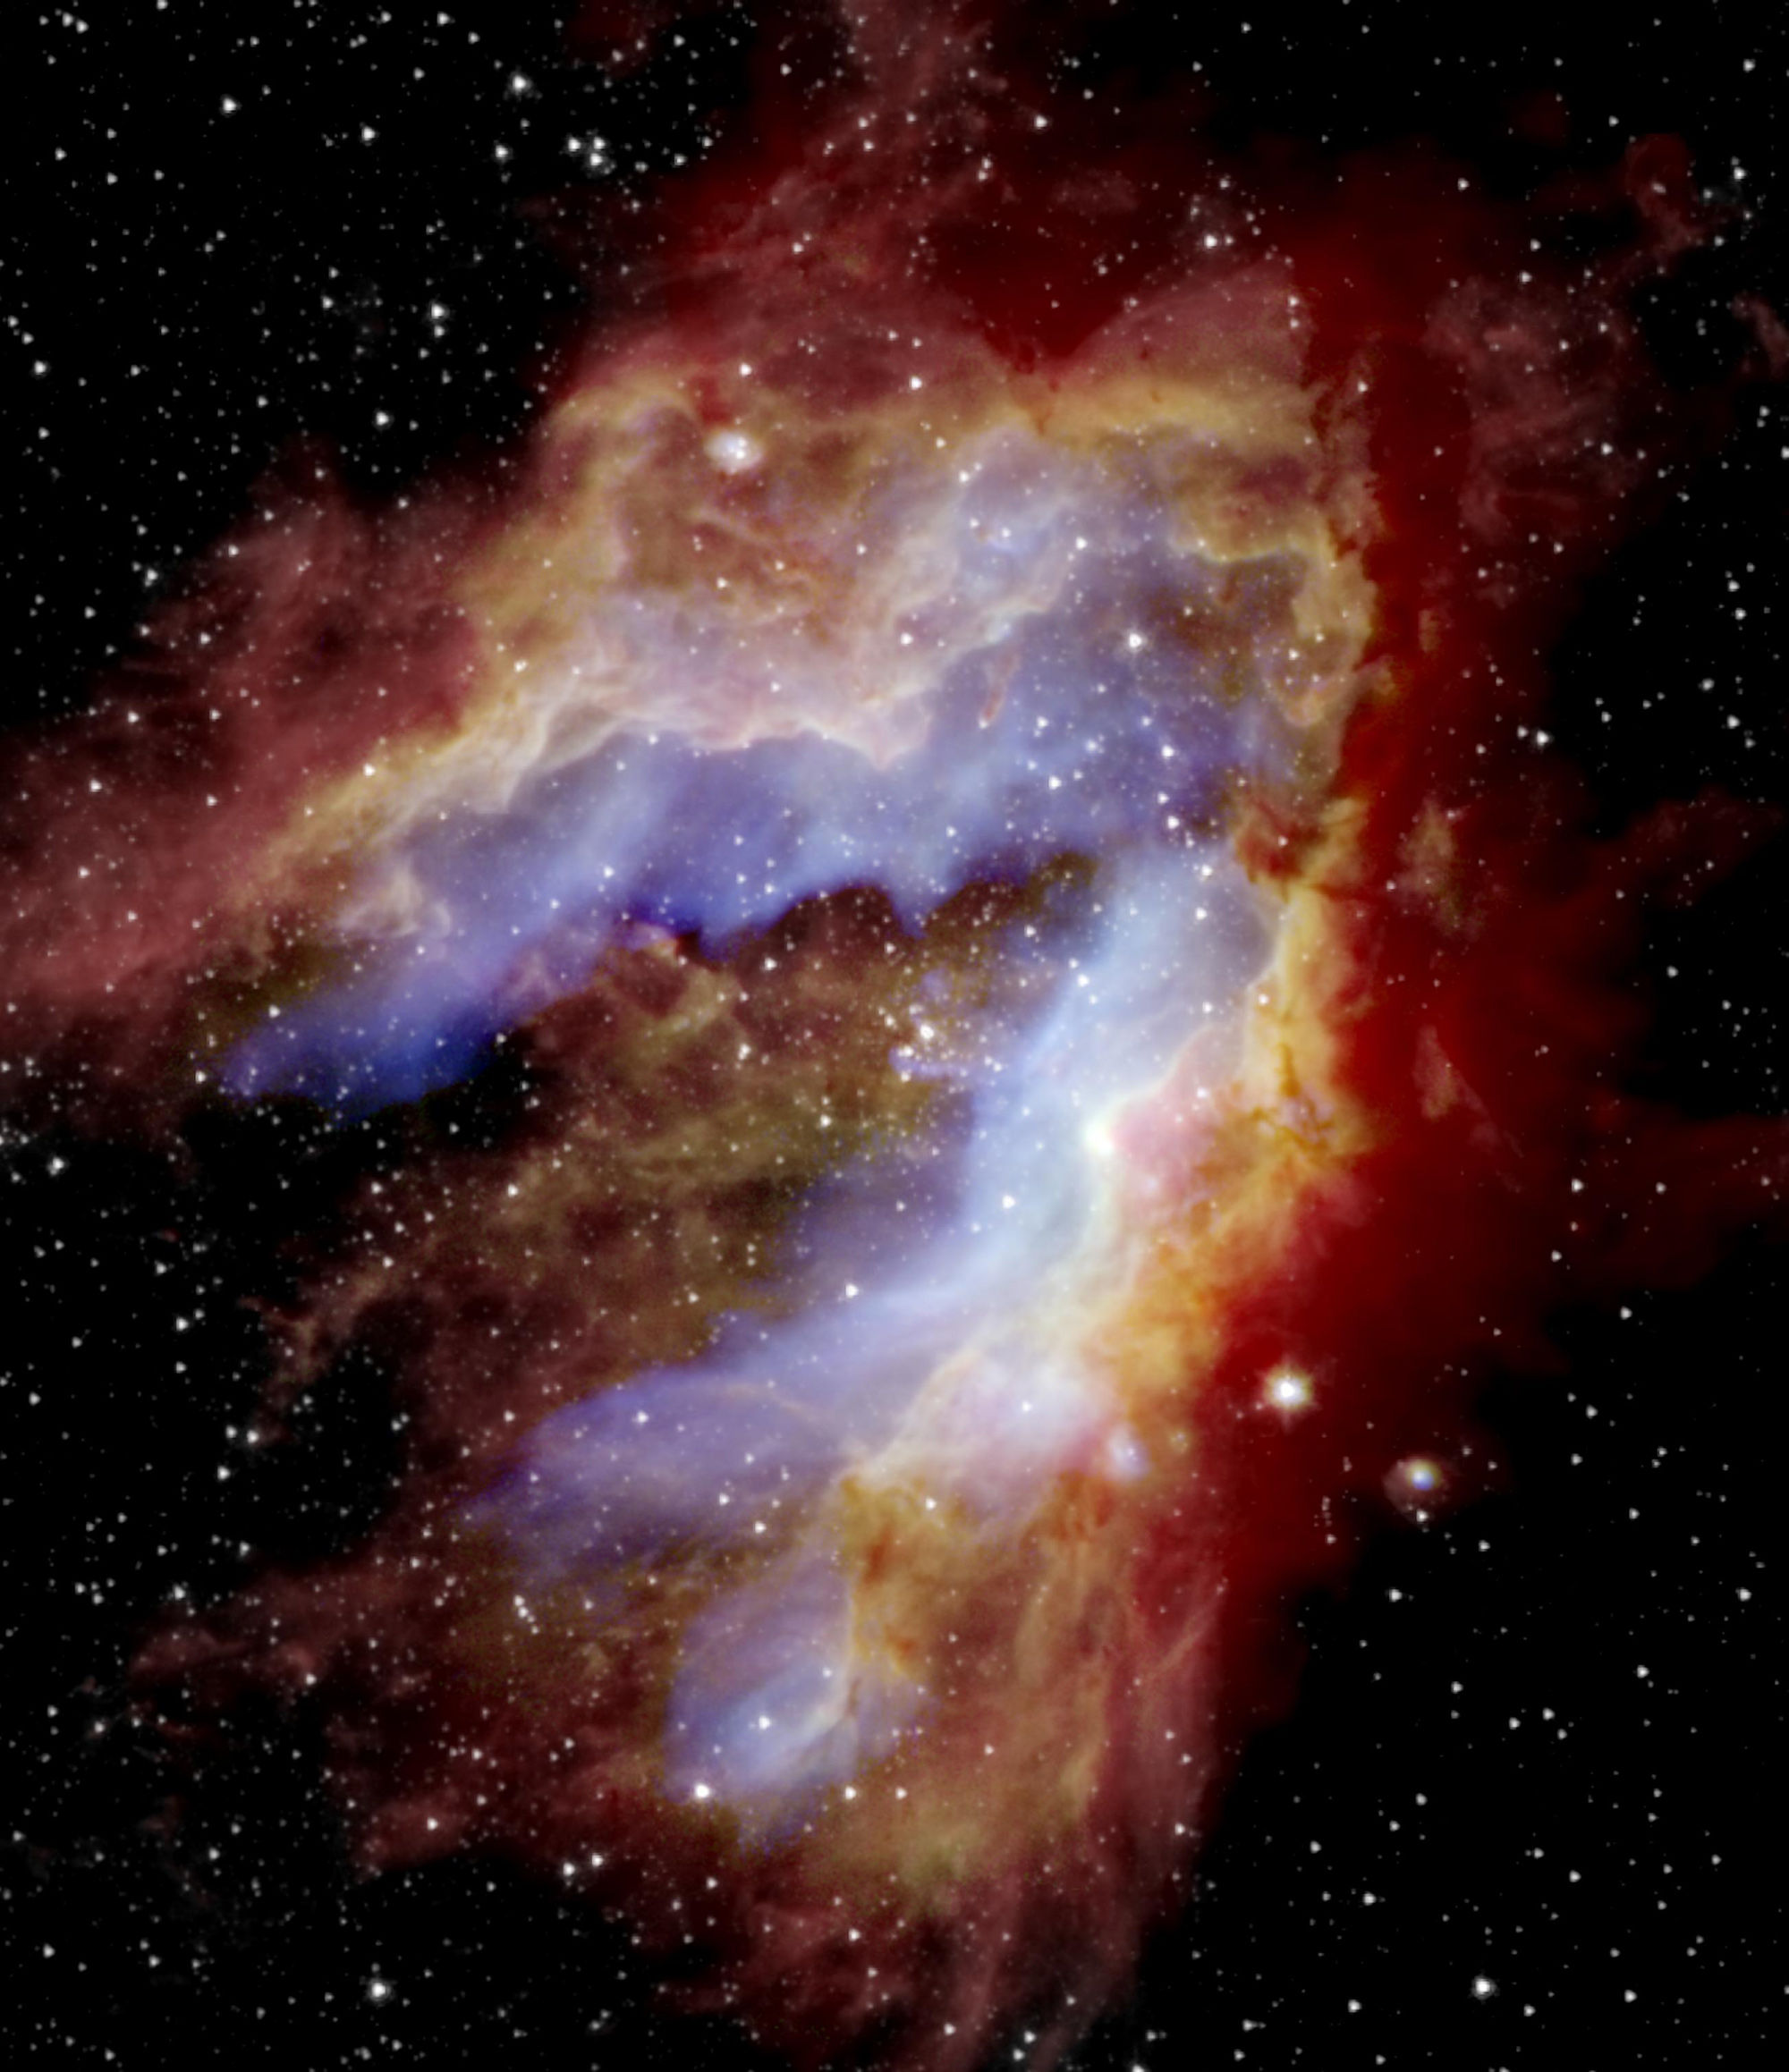 The Swan Nebula is a site of star formation. Herschel And Spitzer space observatories see the stars and outer gaseous regions, while SOFIA observations (blue and green) show gas and dust where stars are in the process of being born.